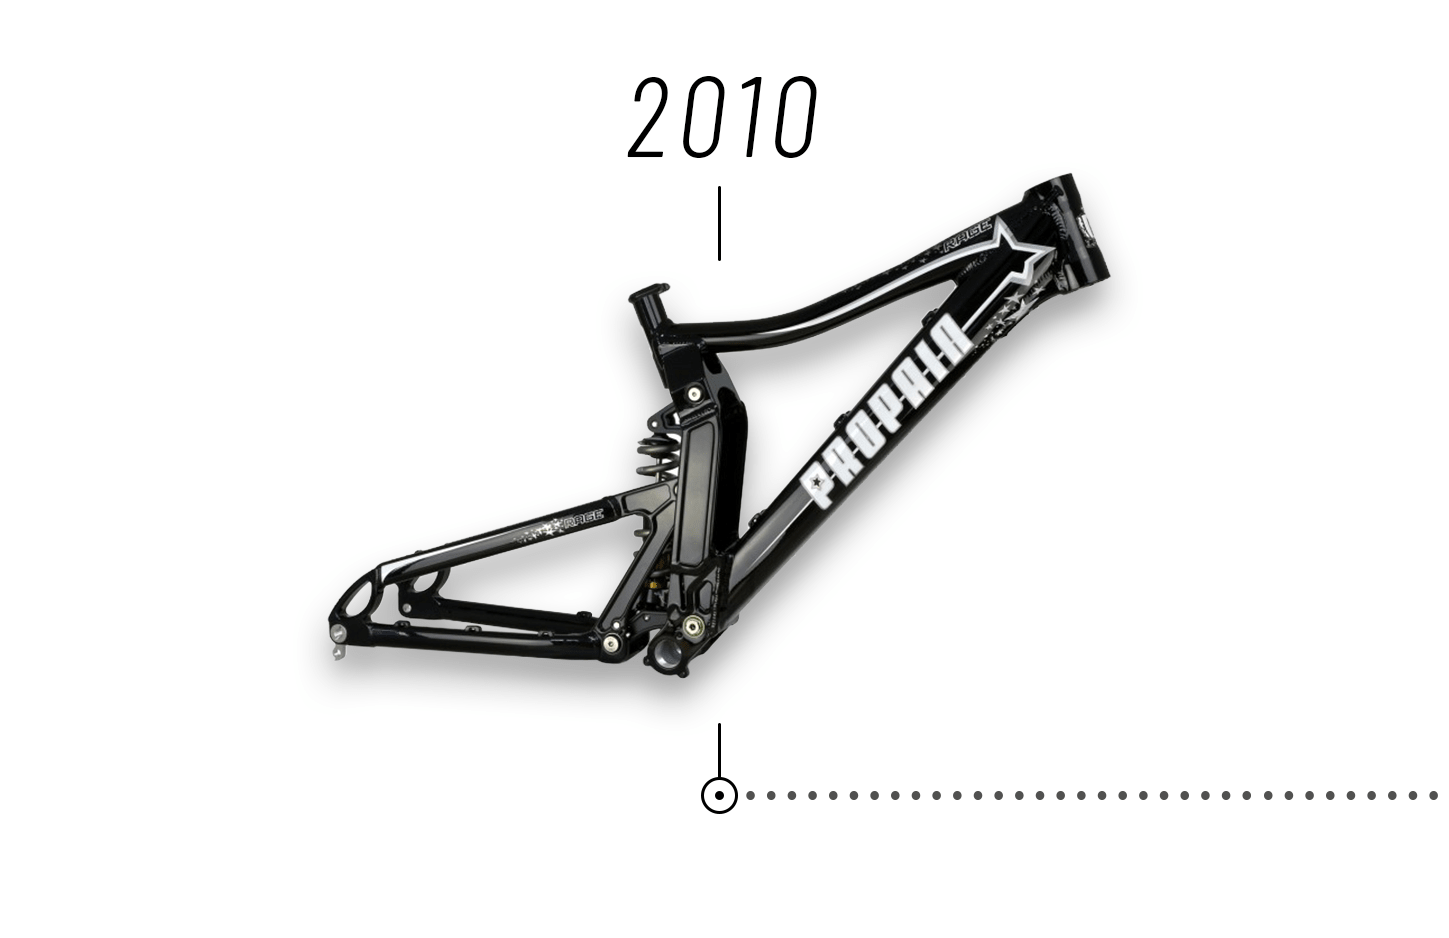 2012 meant an extremely exciting year: The foundation of Propain Bicycles GmbH, entry of David Assfalg as a CEO.